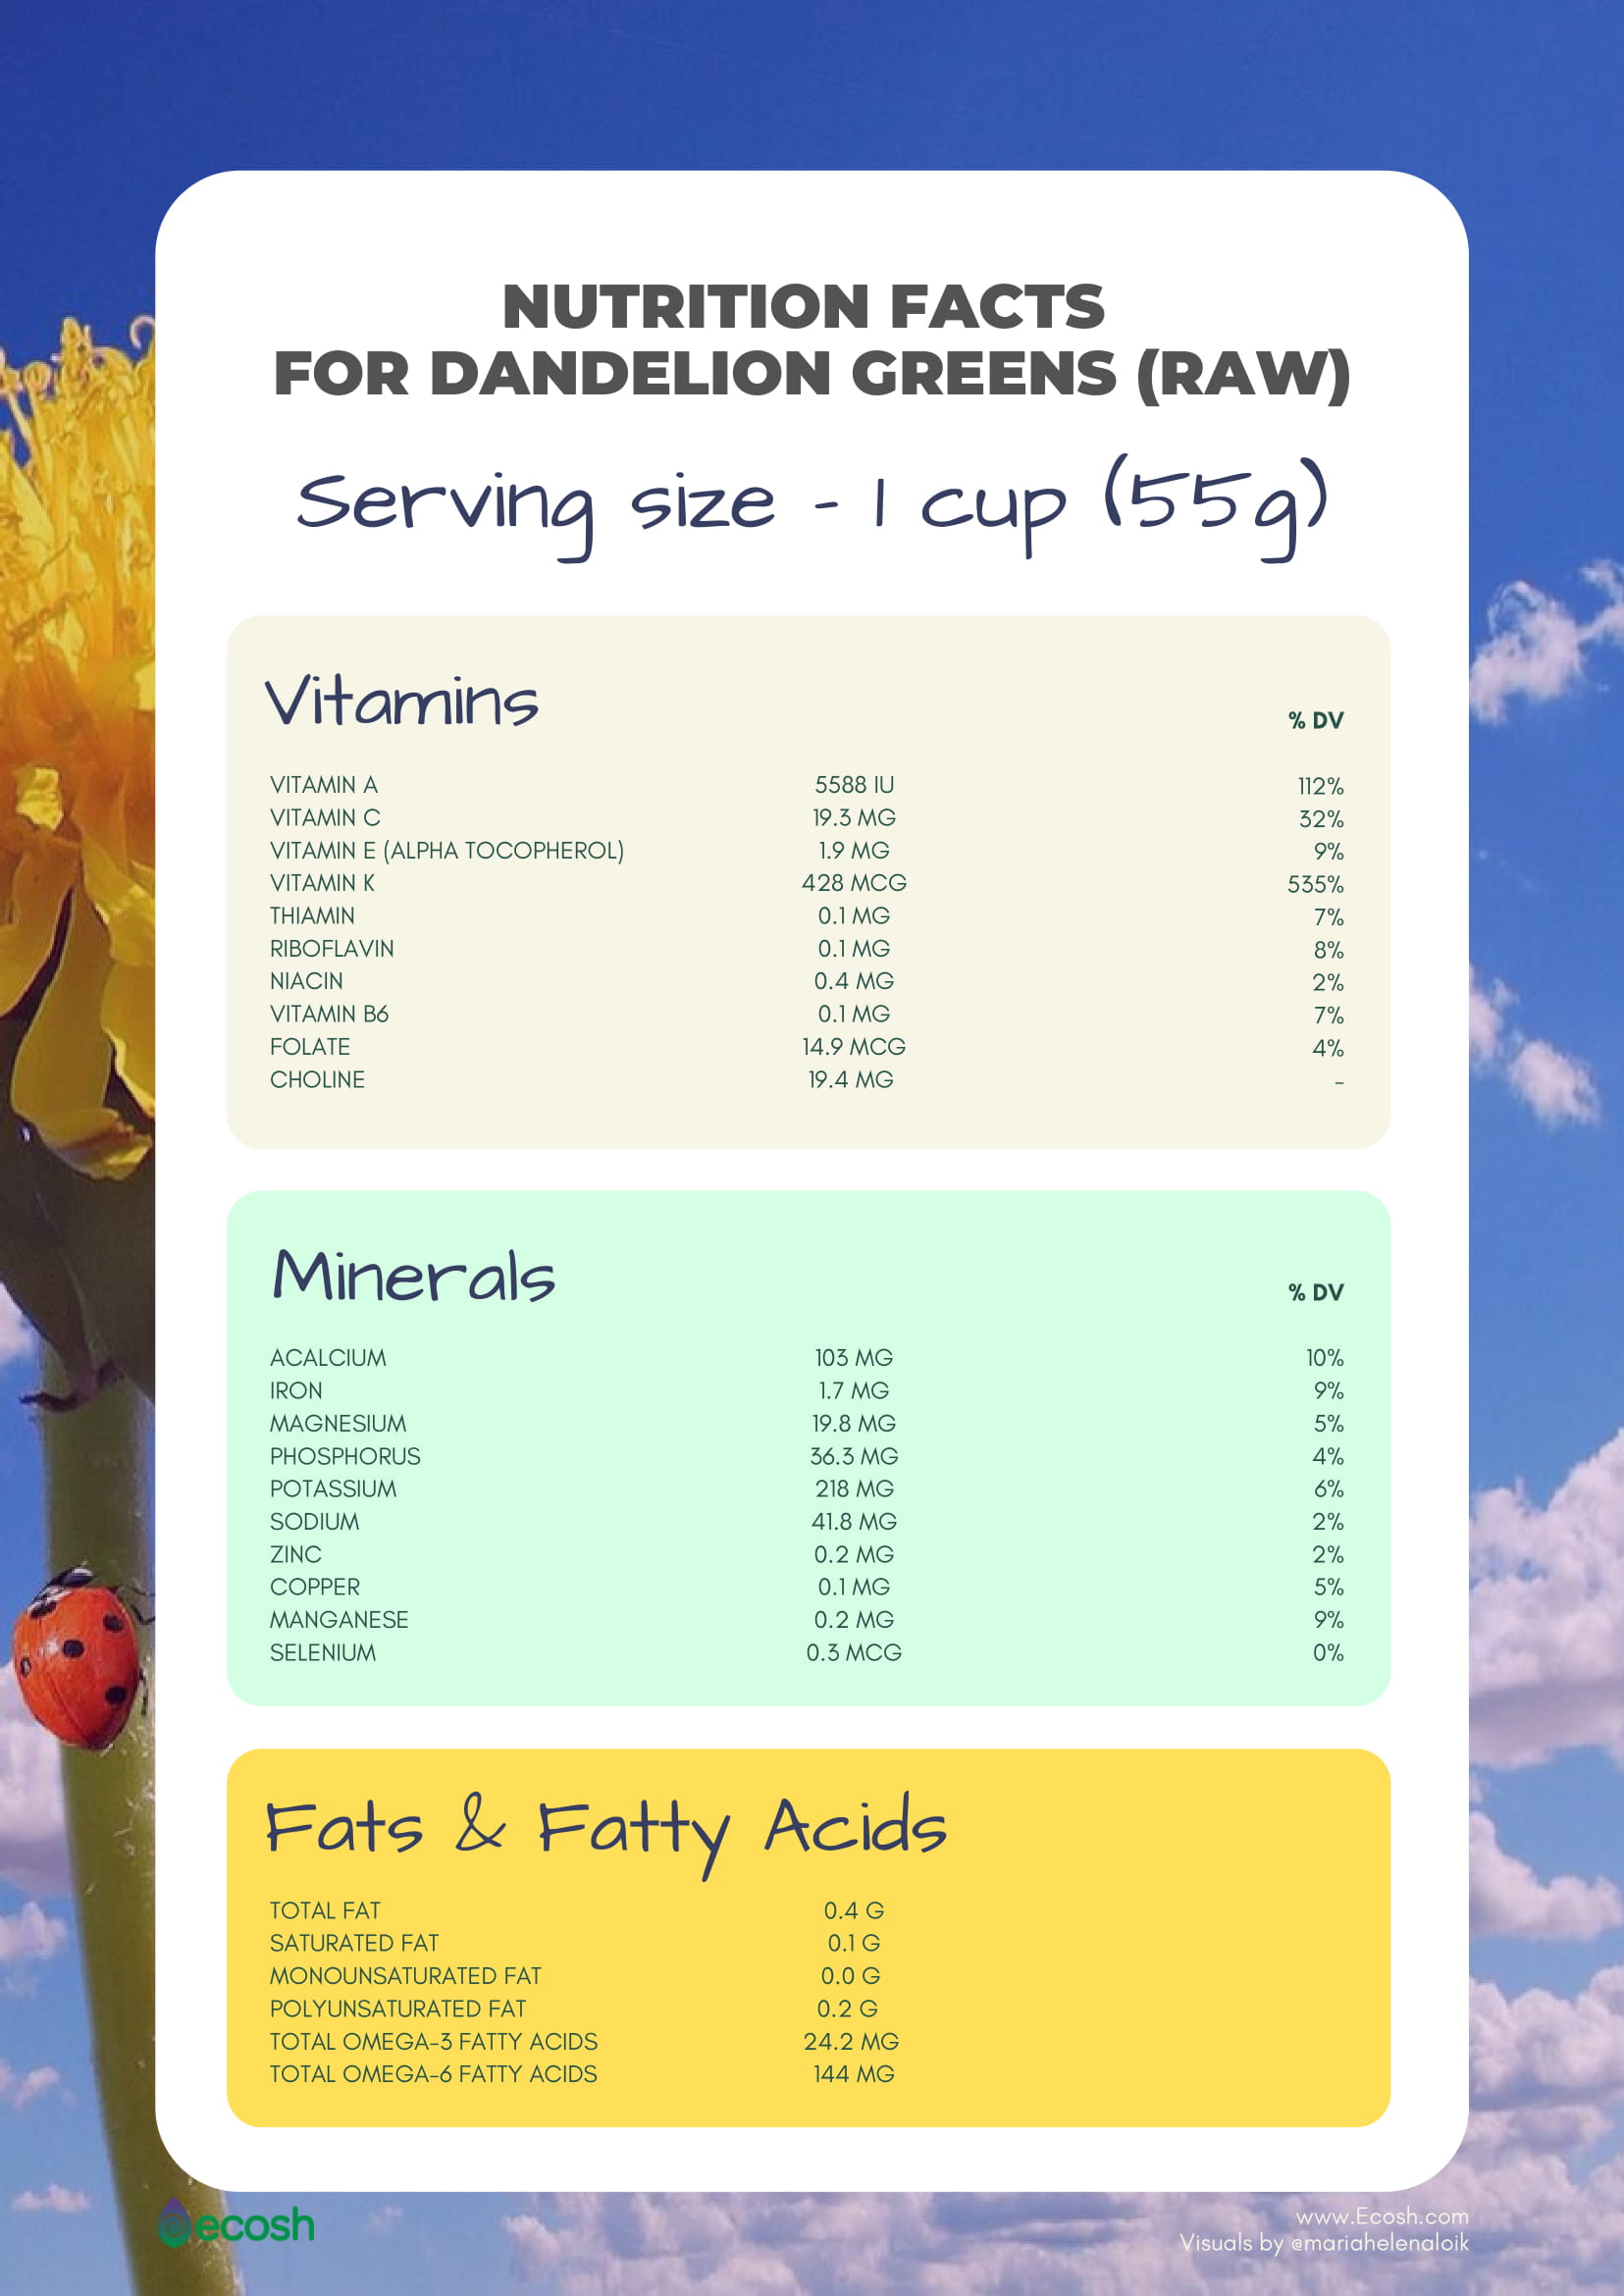 Nutrition facts for Dandelion greens (raw)